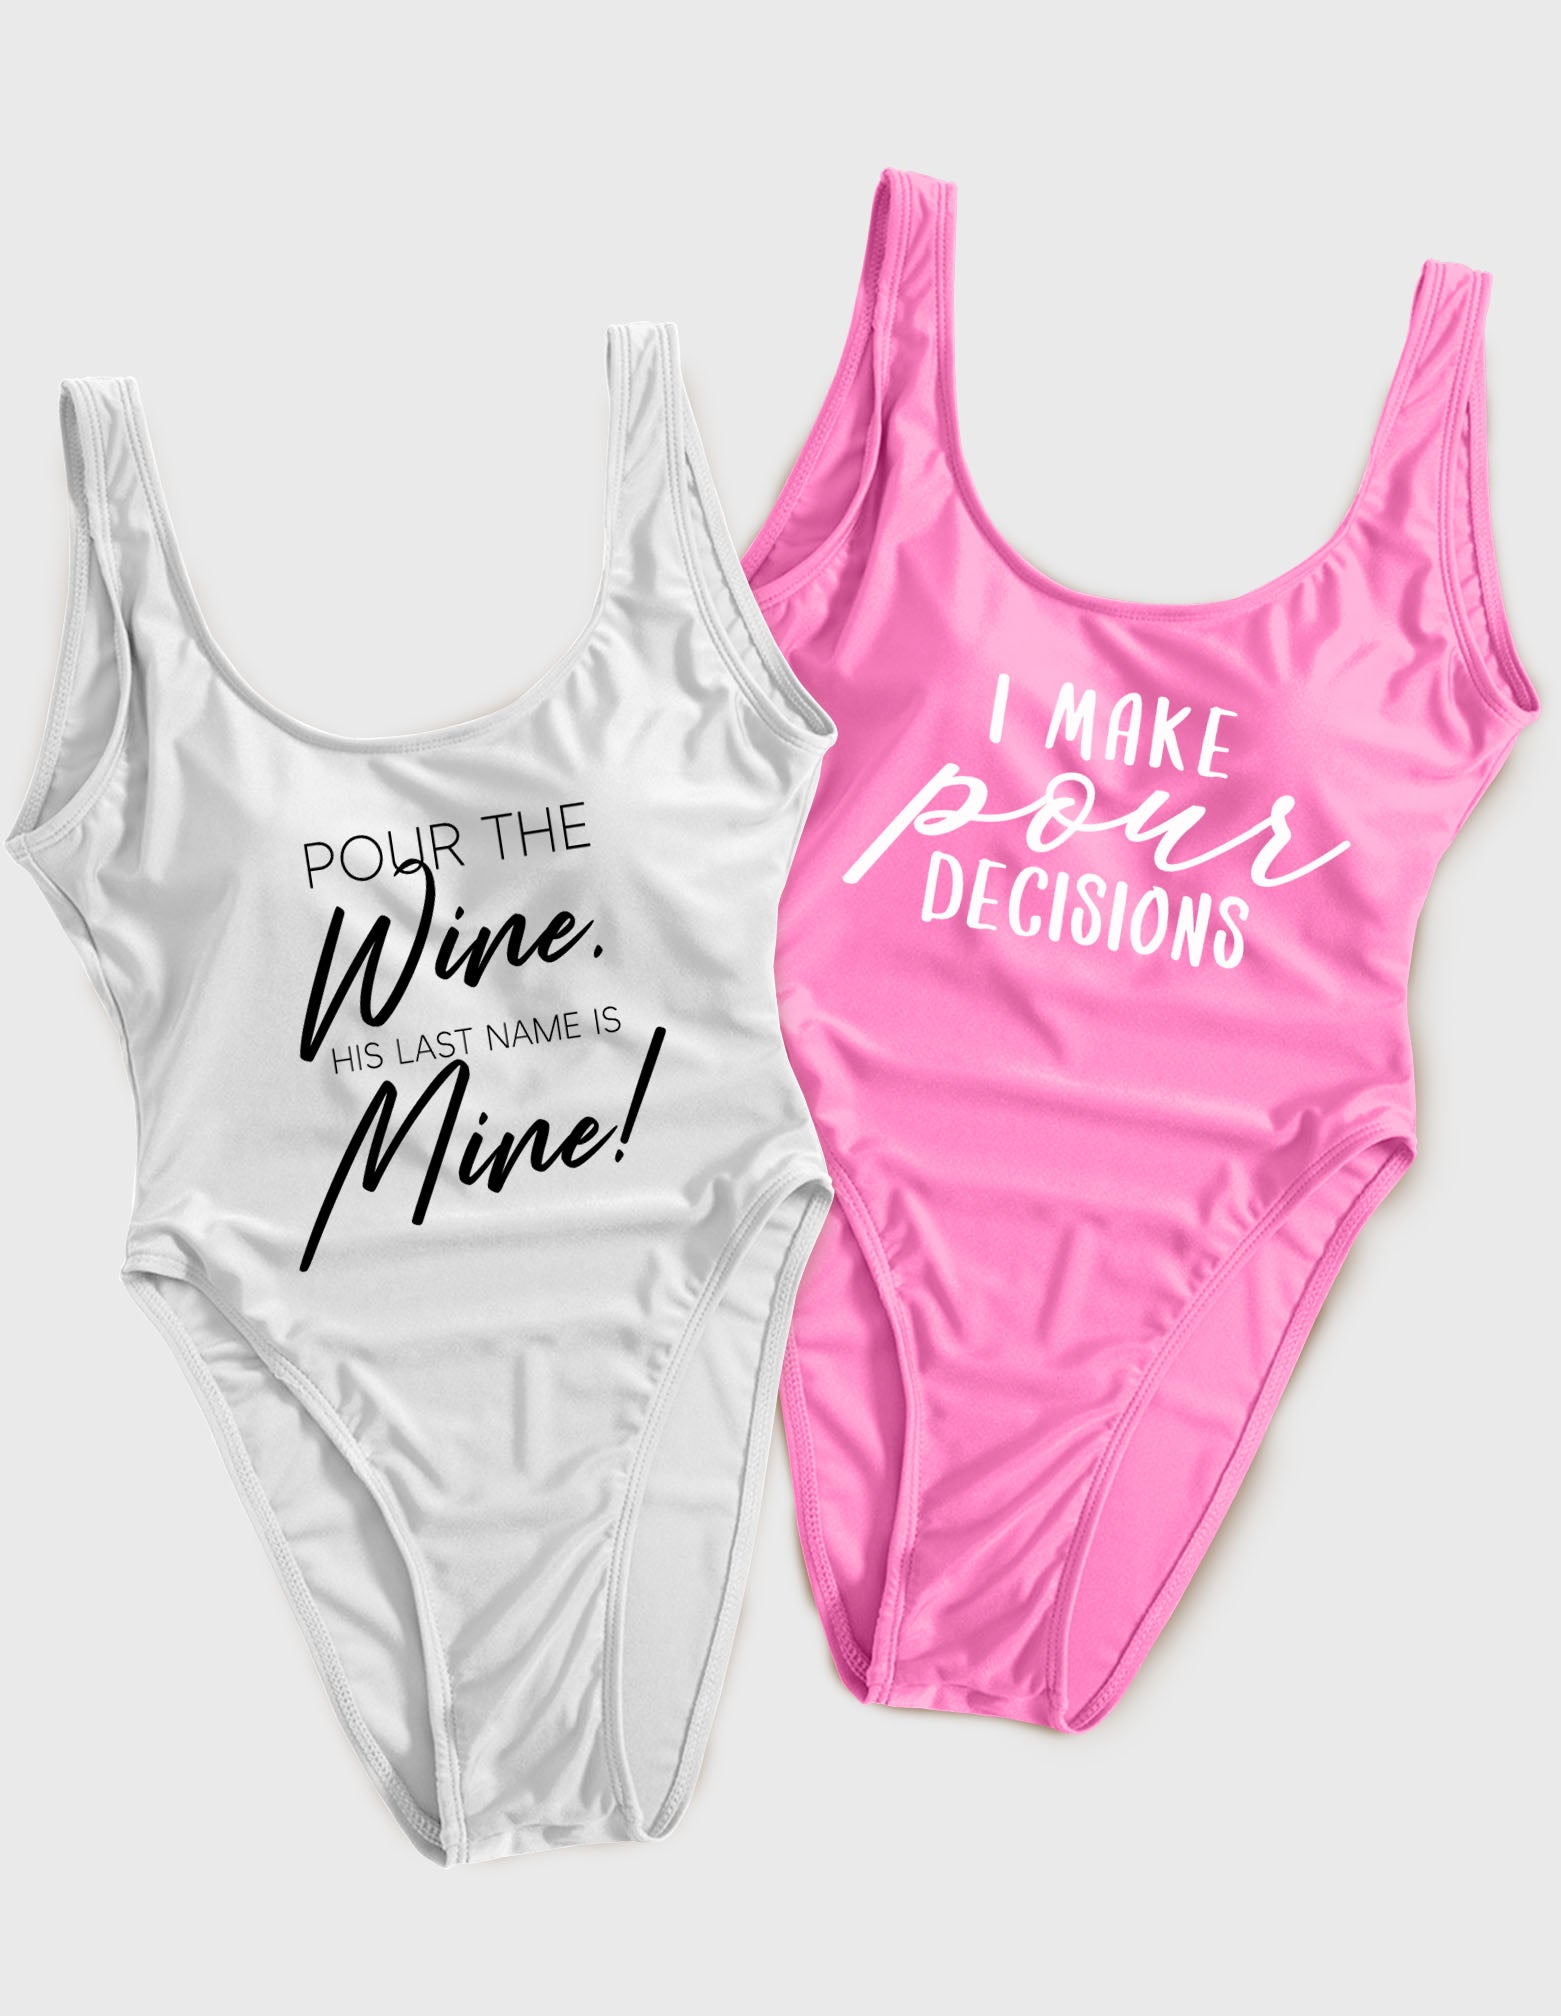 Pour The Wine His Last Name is Mine & I Make Pour Decisions (95) Swimsuit